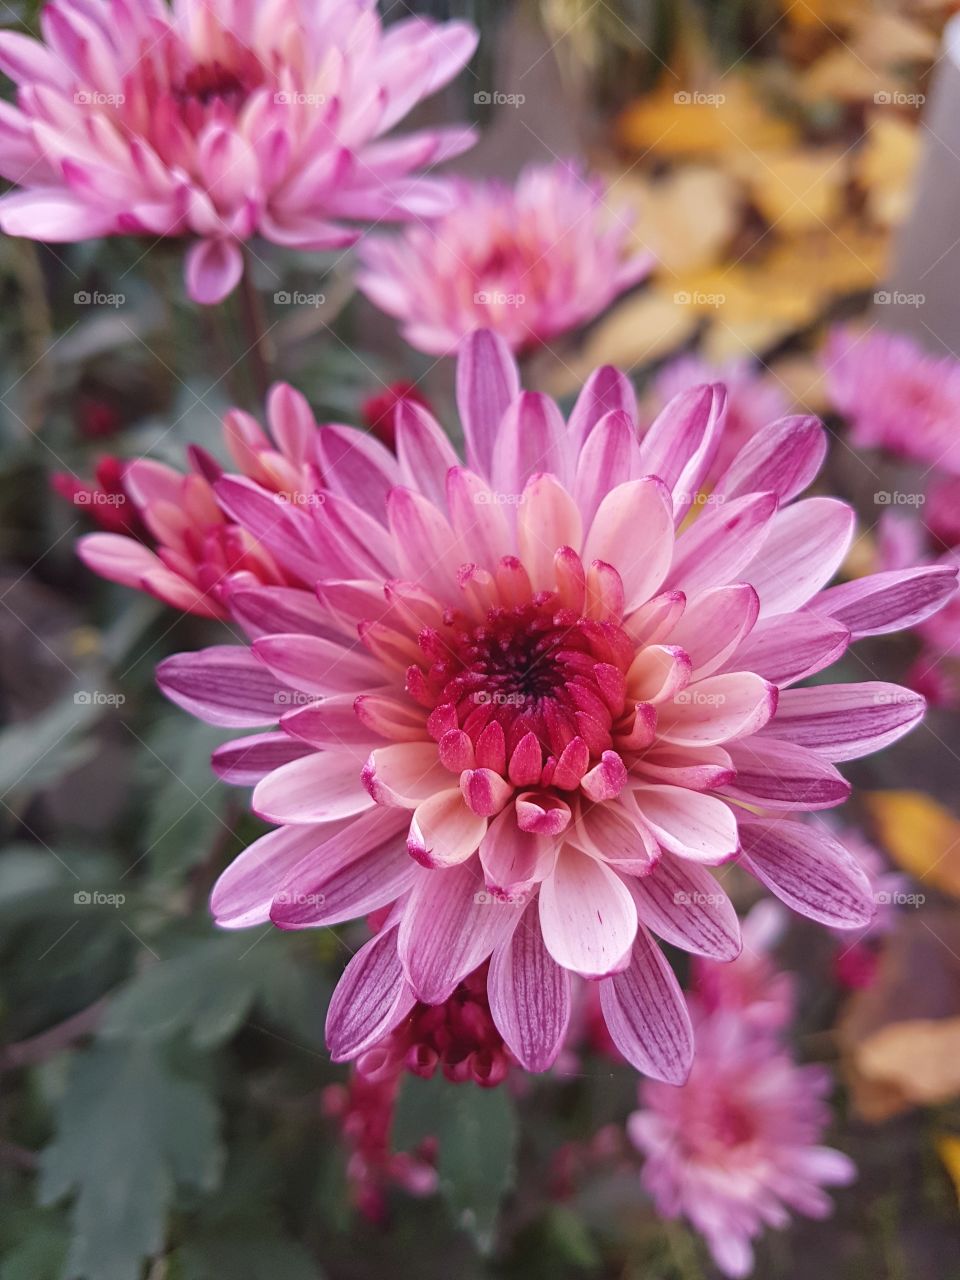 Bloomed in the autumn lilac chrysanthemum flower